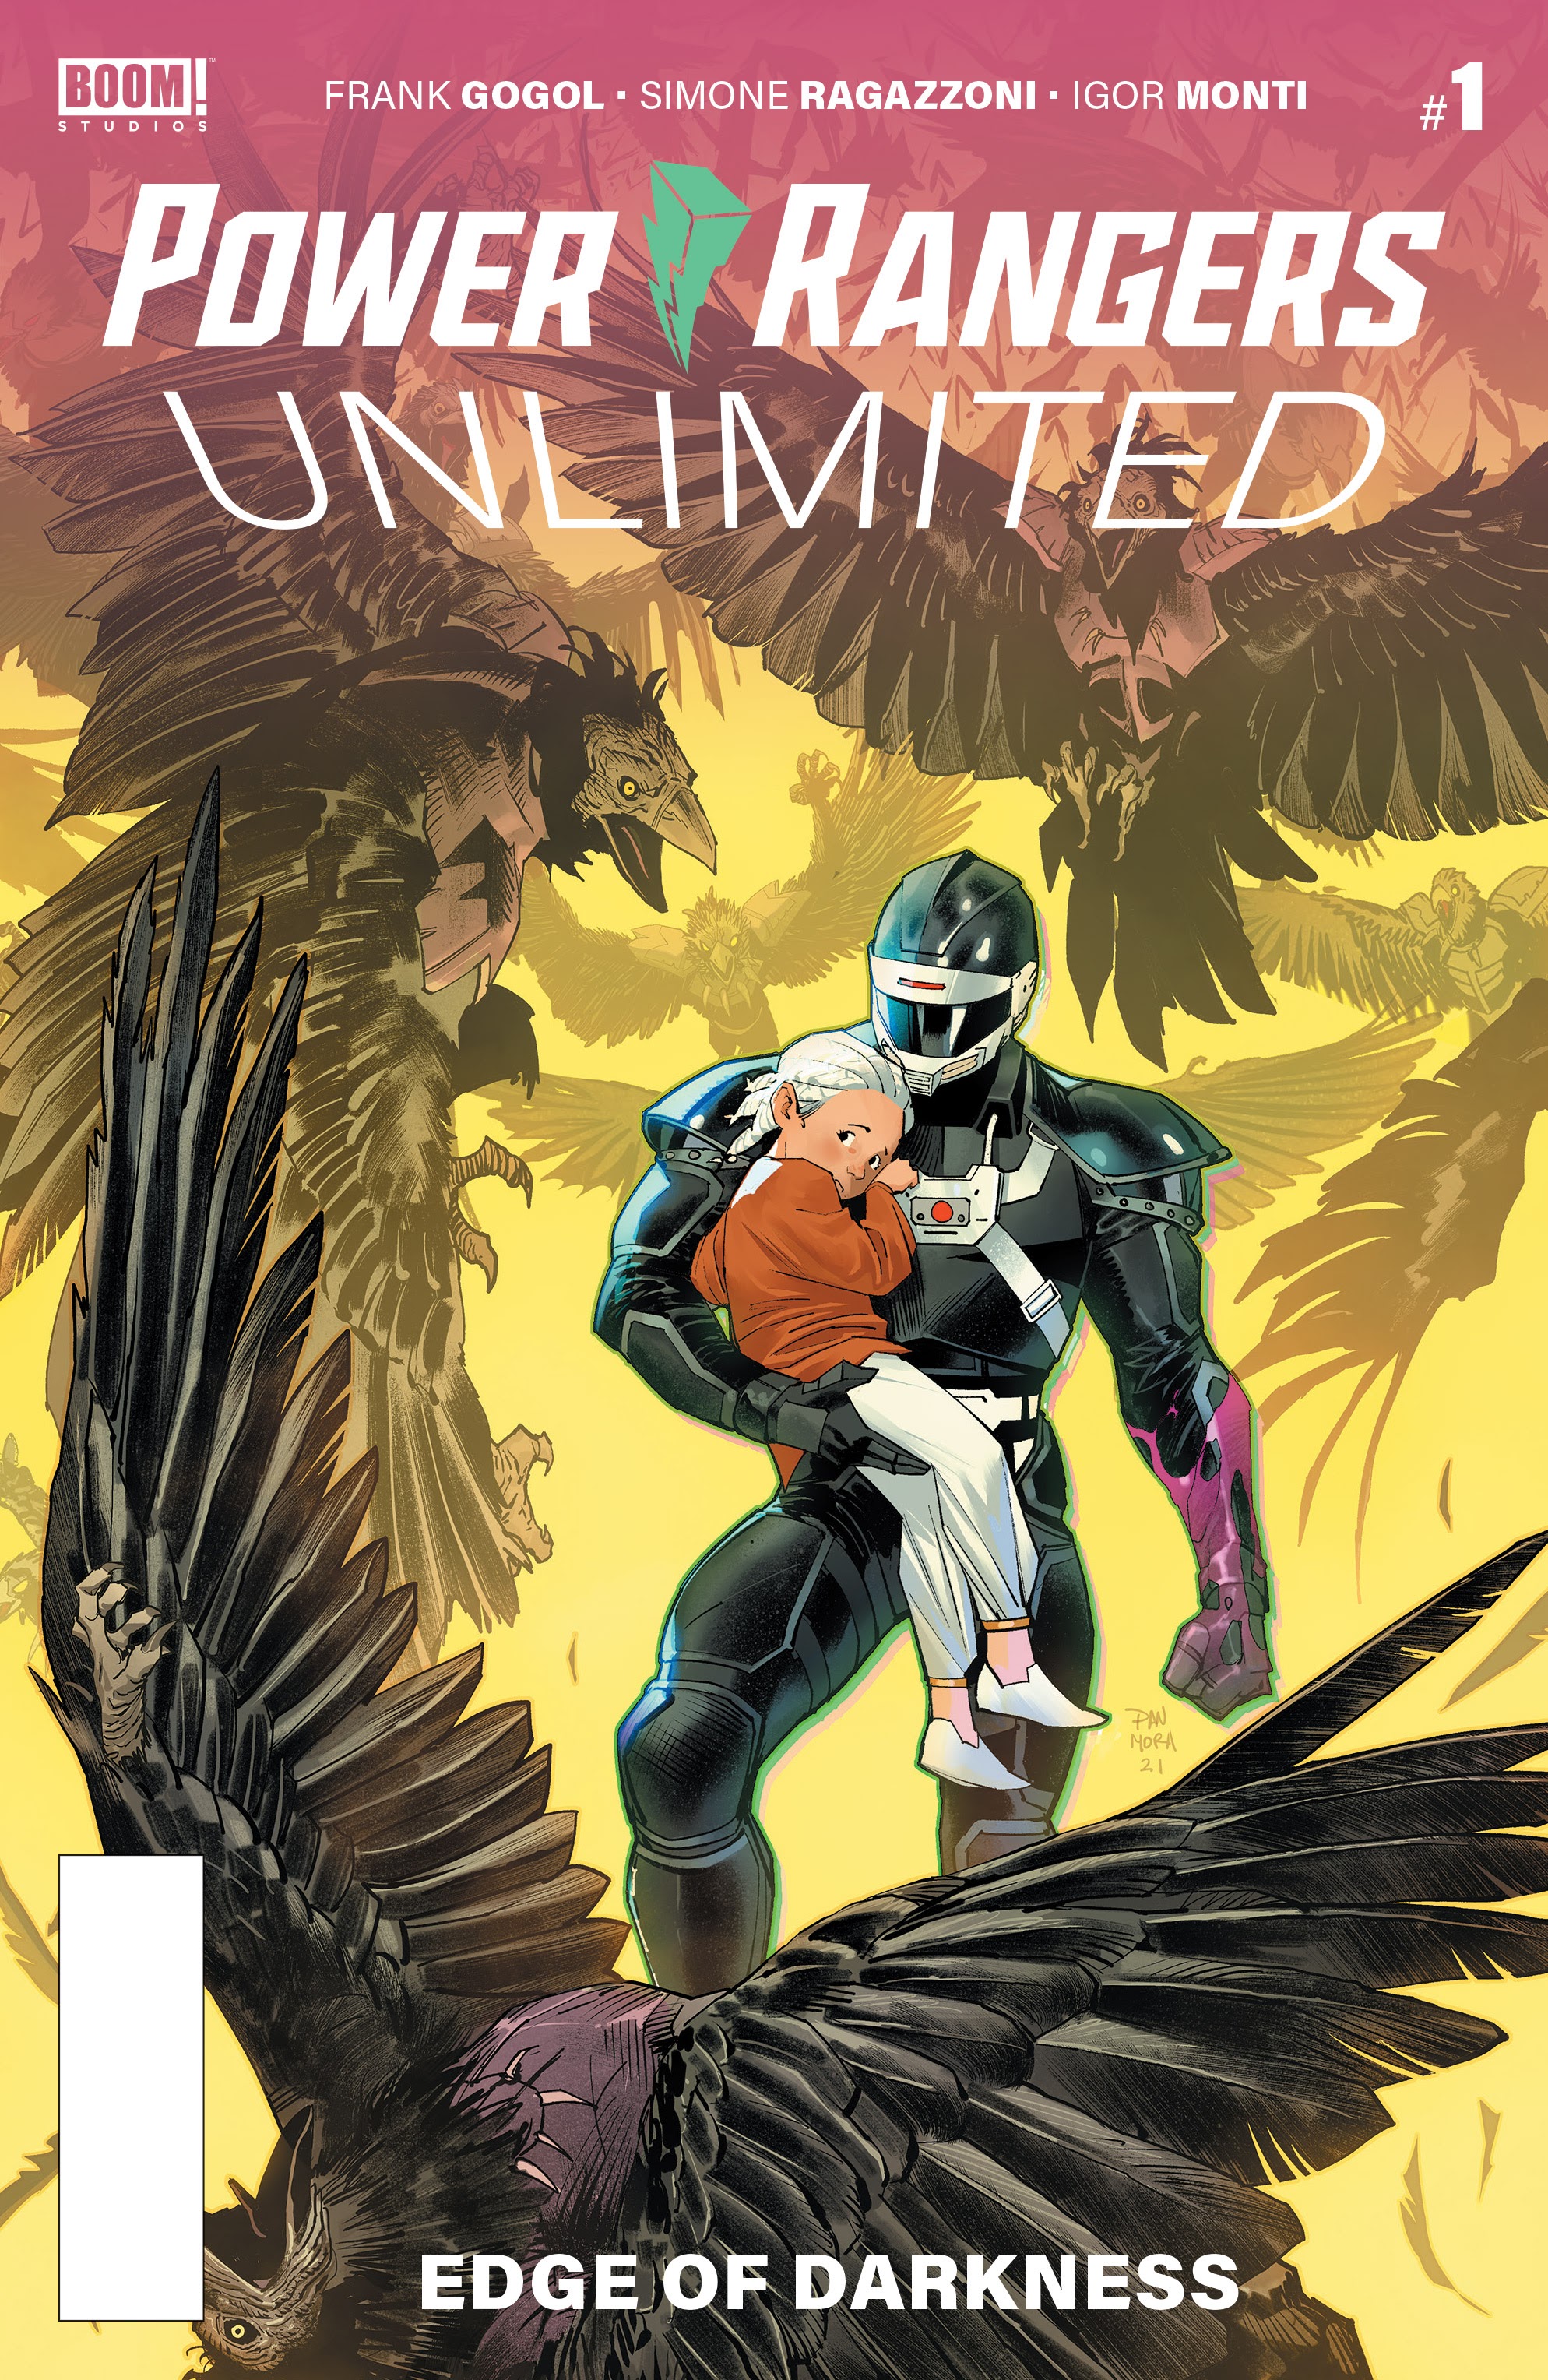 Read online Power Rangers Unlimited comic -  Issue # Edge of Darkness - 1